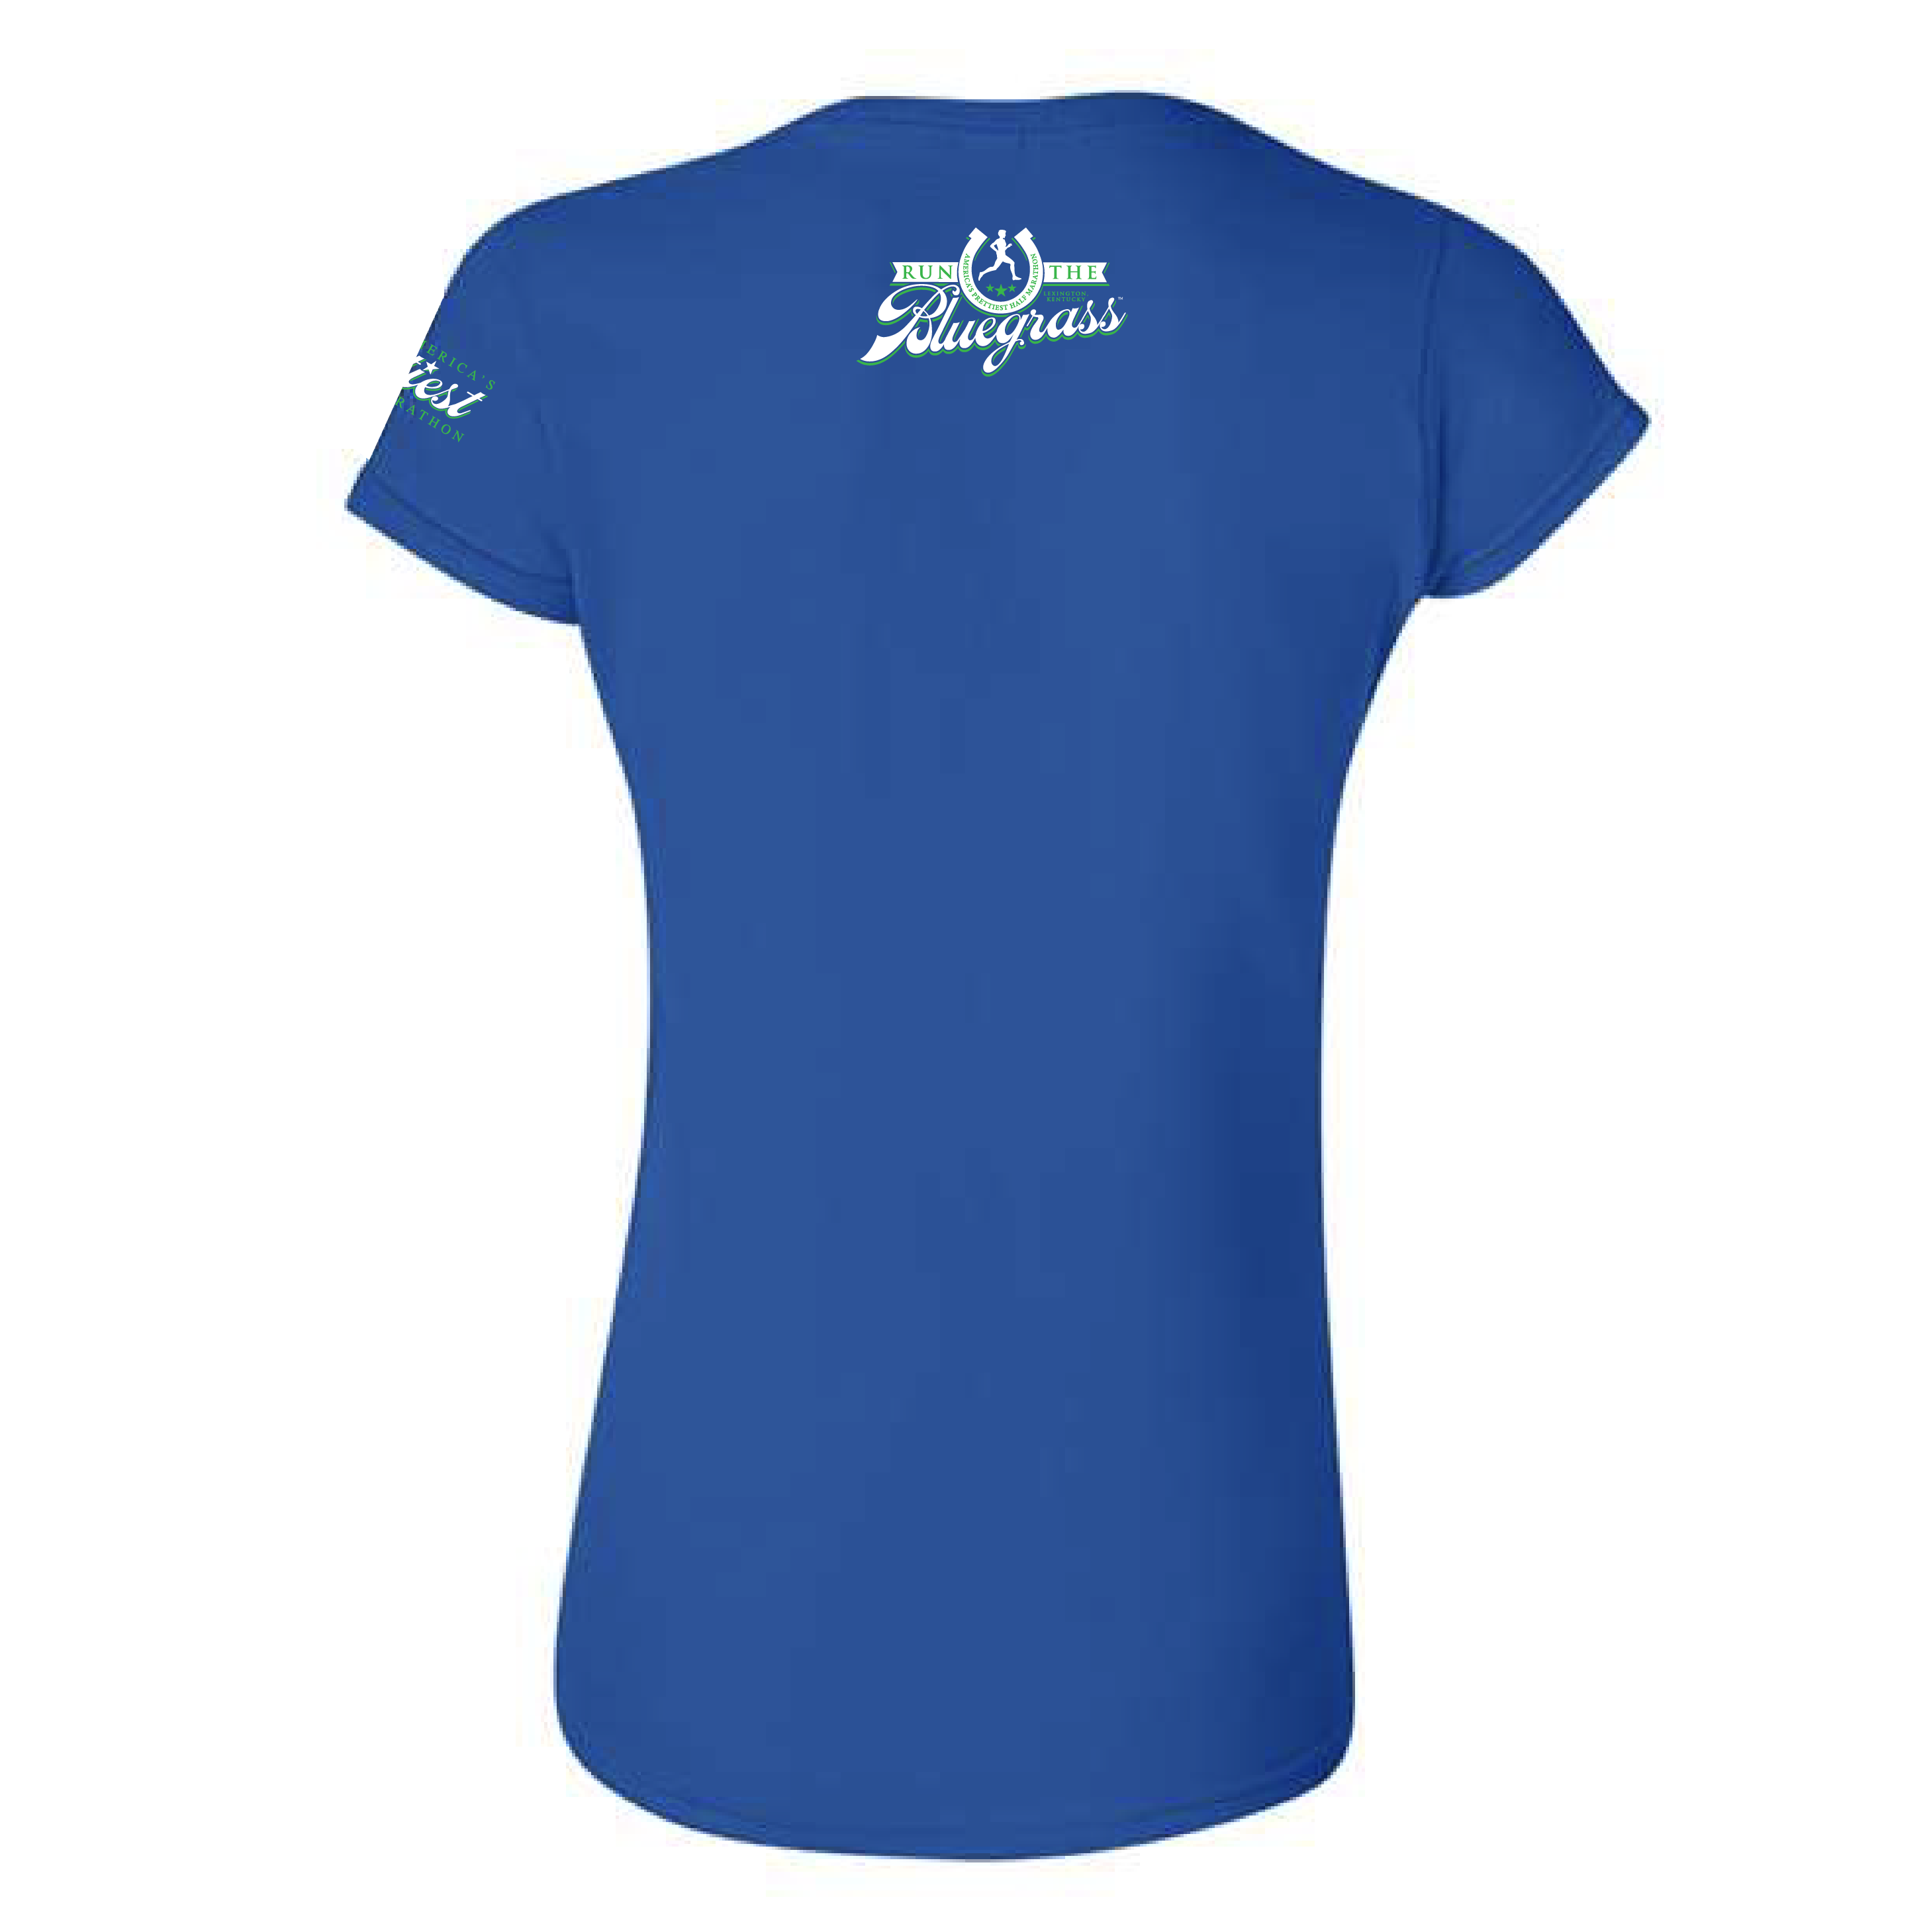 Women's Soft Tee in Royal Blue ("All The Things")